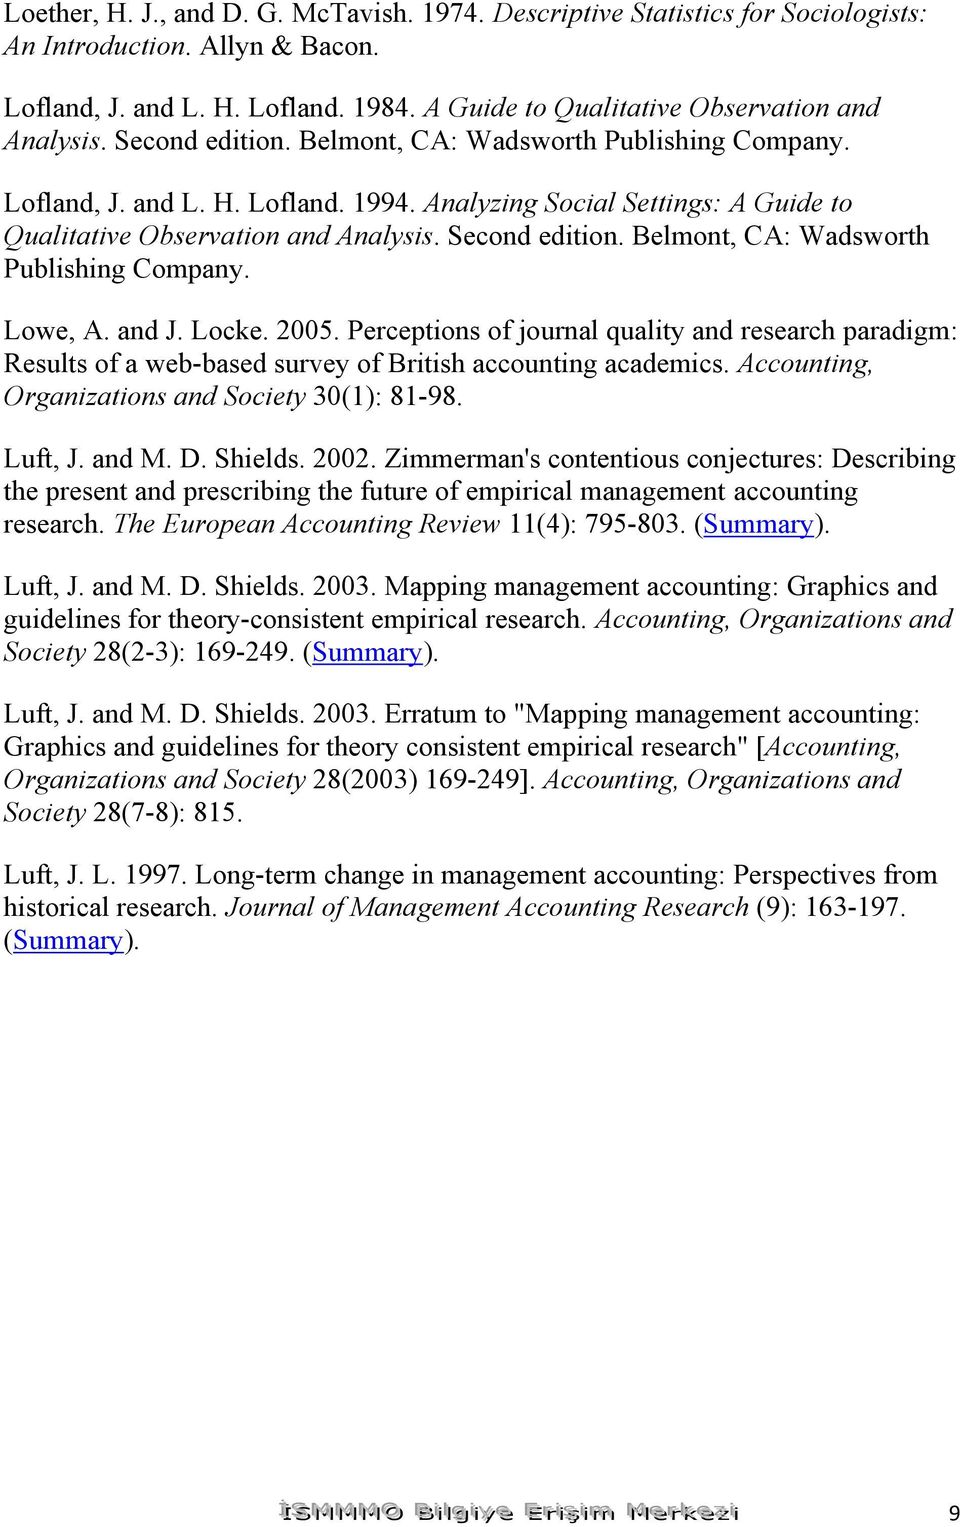 Belmont, CA: Wadsworth Publishing Company. Lowe, A. and J. Locke. 2005. Perceptions of journal quality and research paradigm: Results of a web-based survey of British accounting academics.